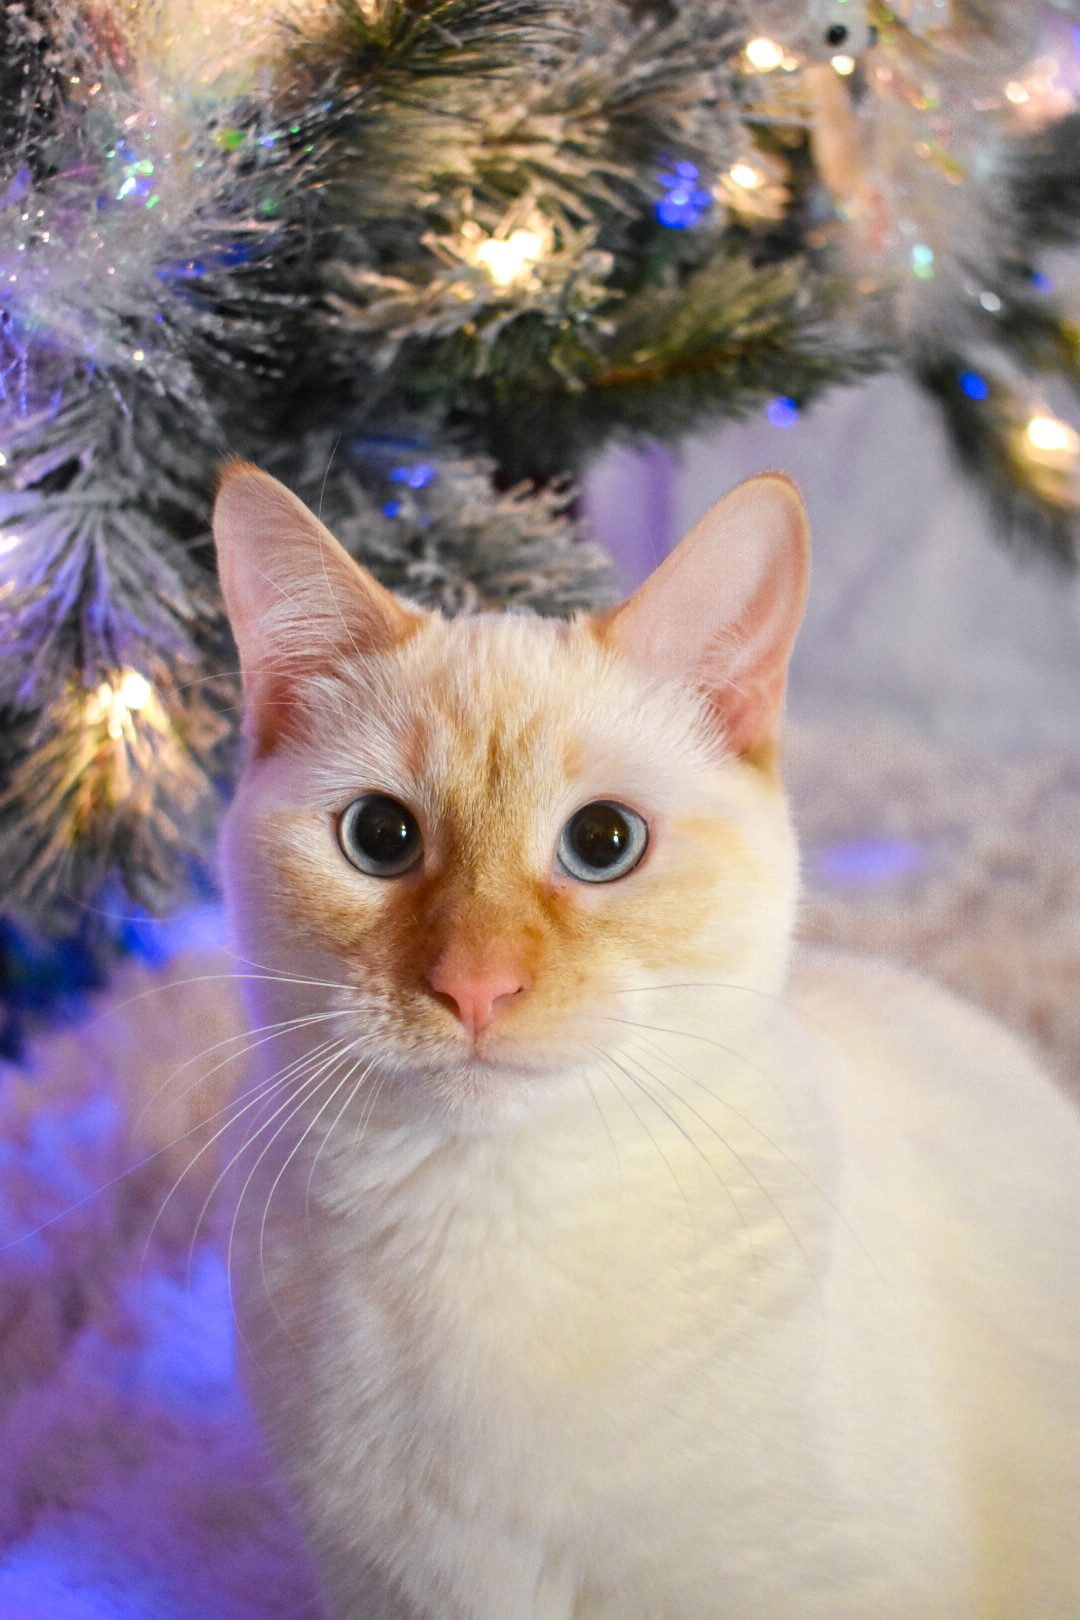 Adorable Pets Filled with Christmas Spirit | Reader's Digest